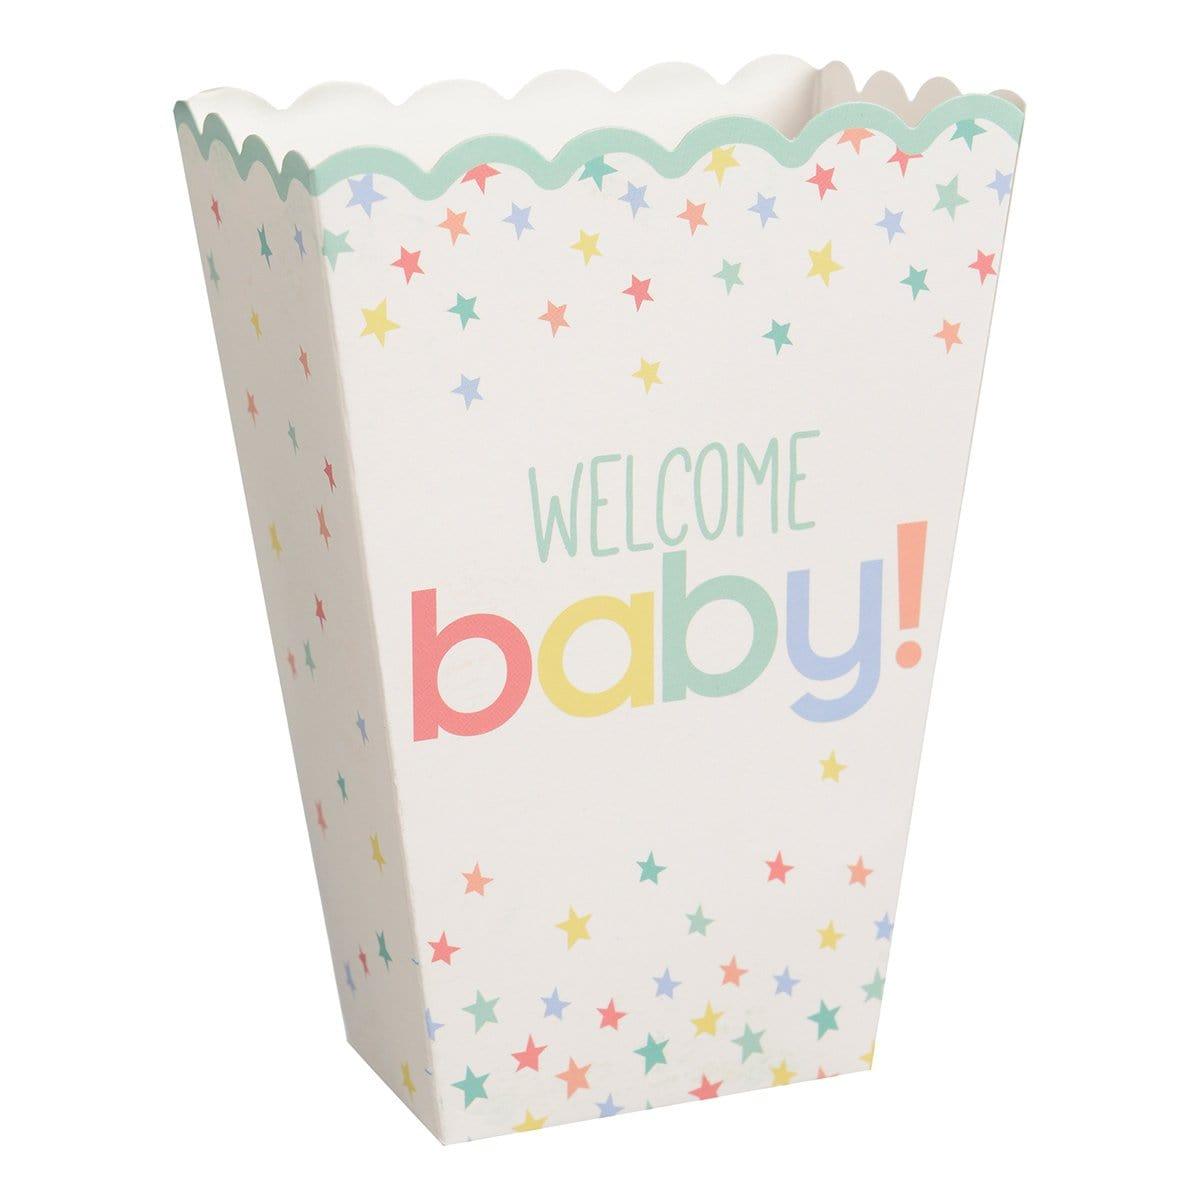 Buy Baby Shower Popcorn Boxes, 20 Count sold at Party Expert